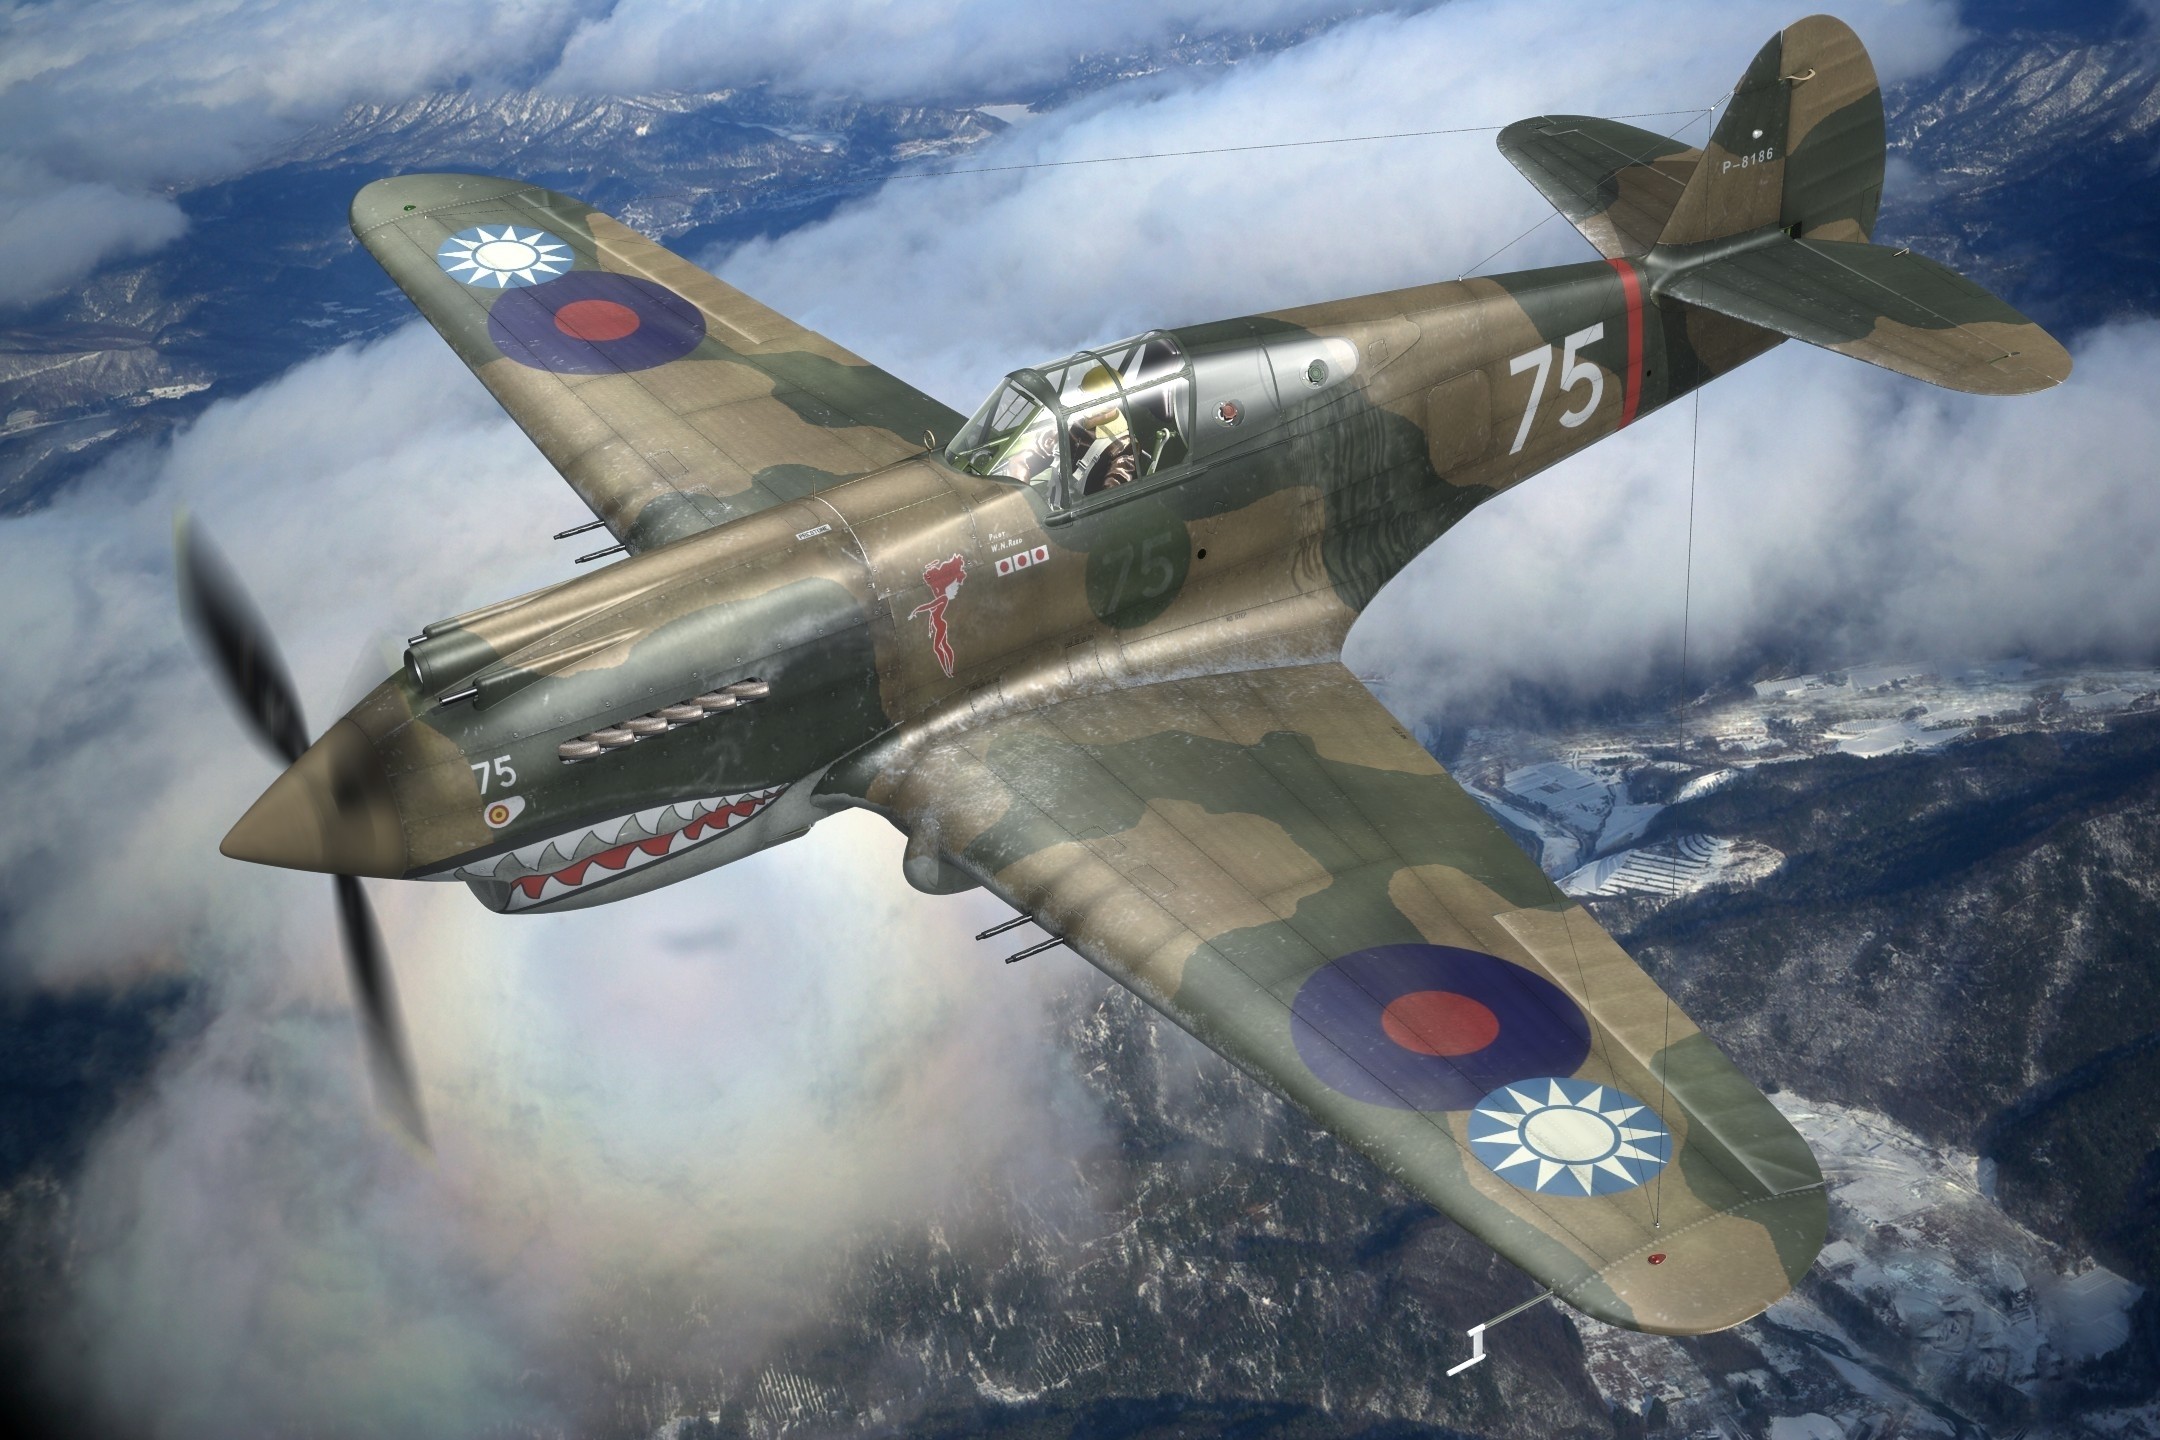 2160x1440 Title : p-40 full hd wallpaper and background image | 2160Ã1440 |  id:217194. Dimension : 2160 x 1440. File Type : JPG/JPEG